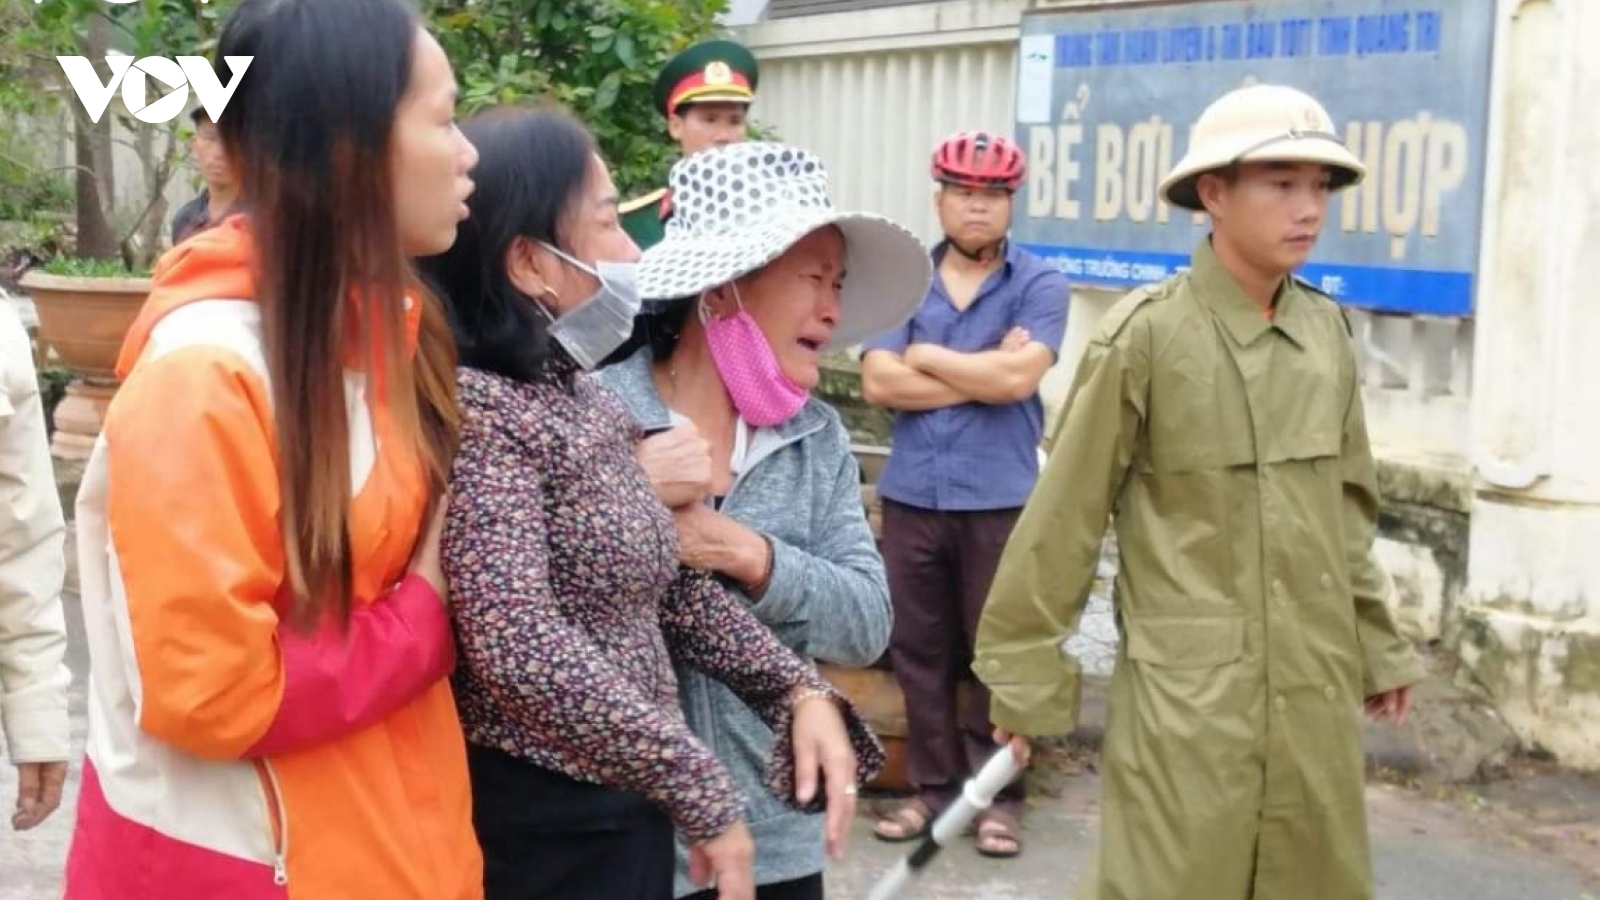 Bodies of 22 victims of Quang Tri landslide discovered